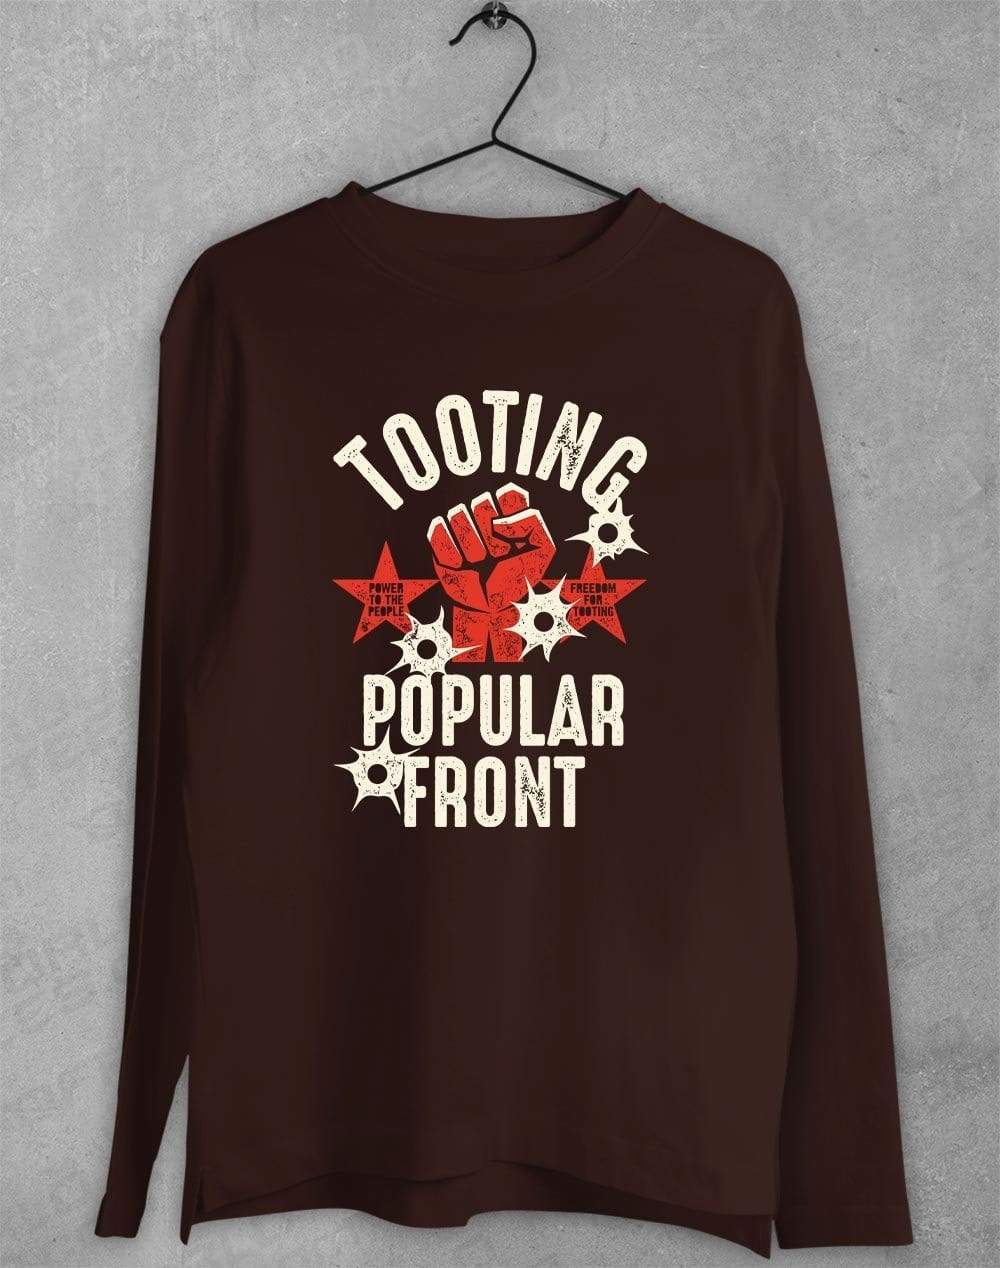 Tooting Popular Front Long Sleeve T-Shirt S / Dark Chocolate  - Off World Tees